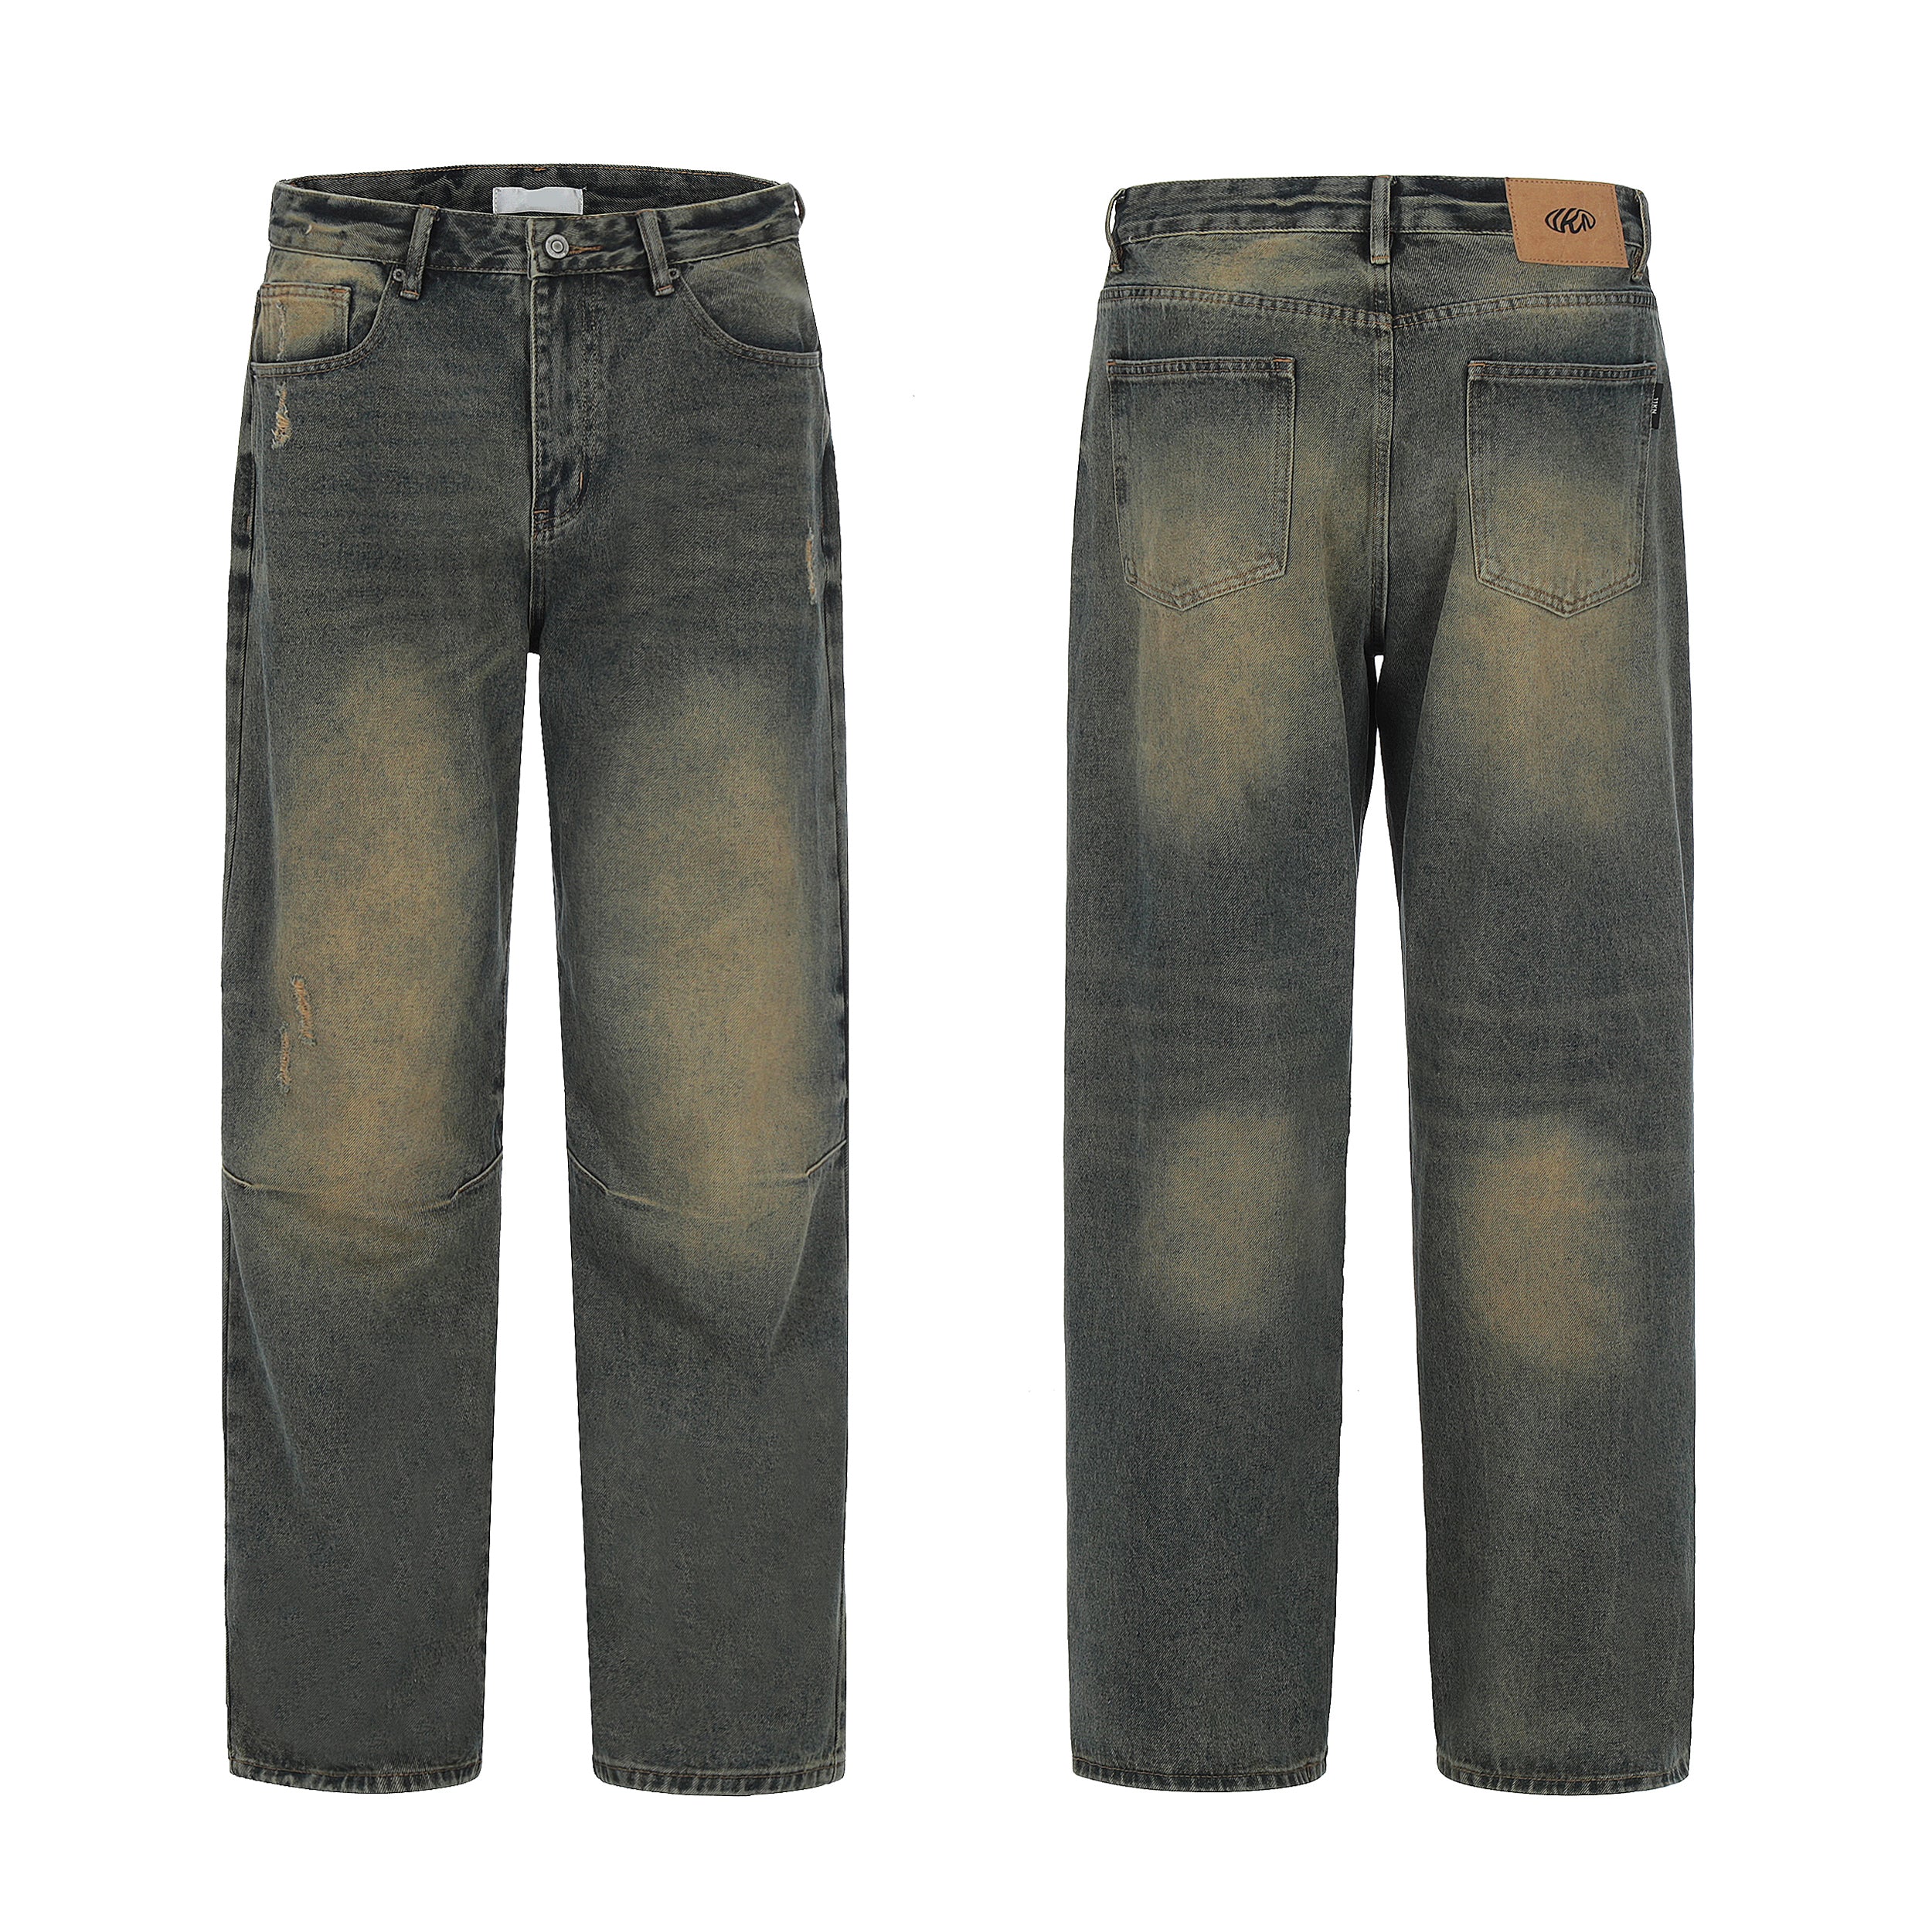 Faire Echo Retro washed yellow jeans